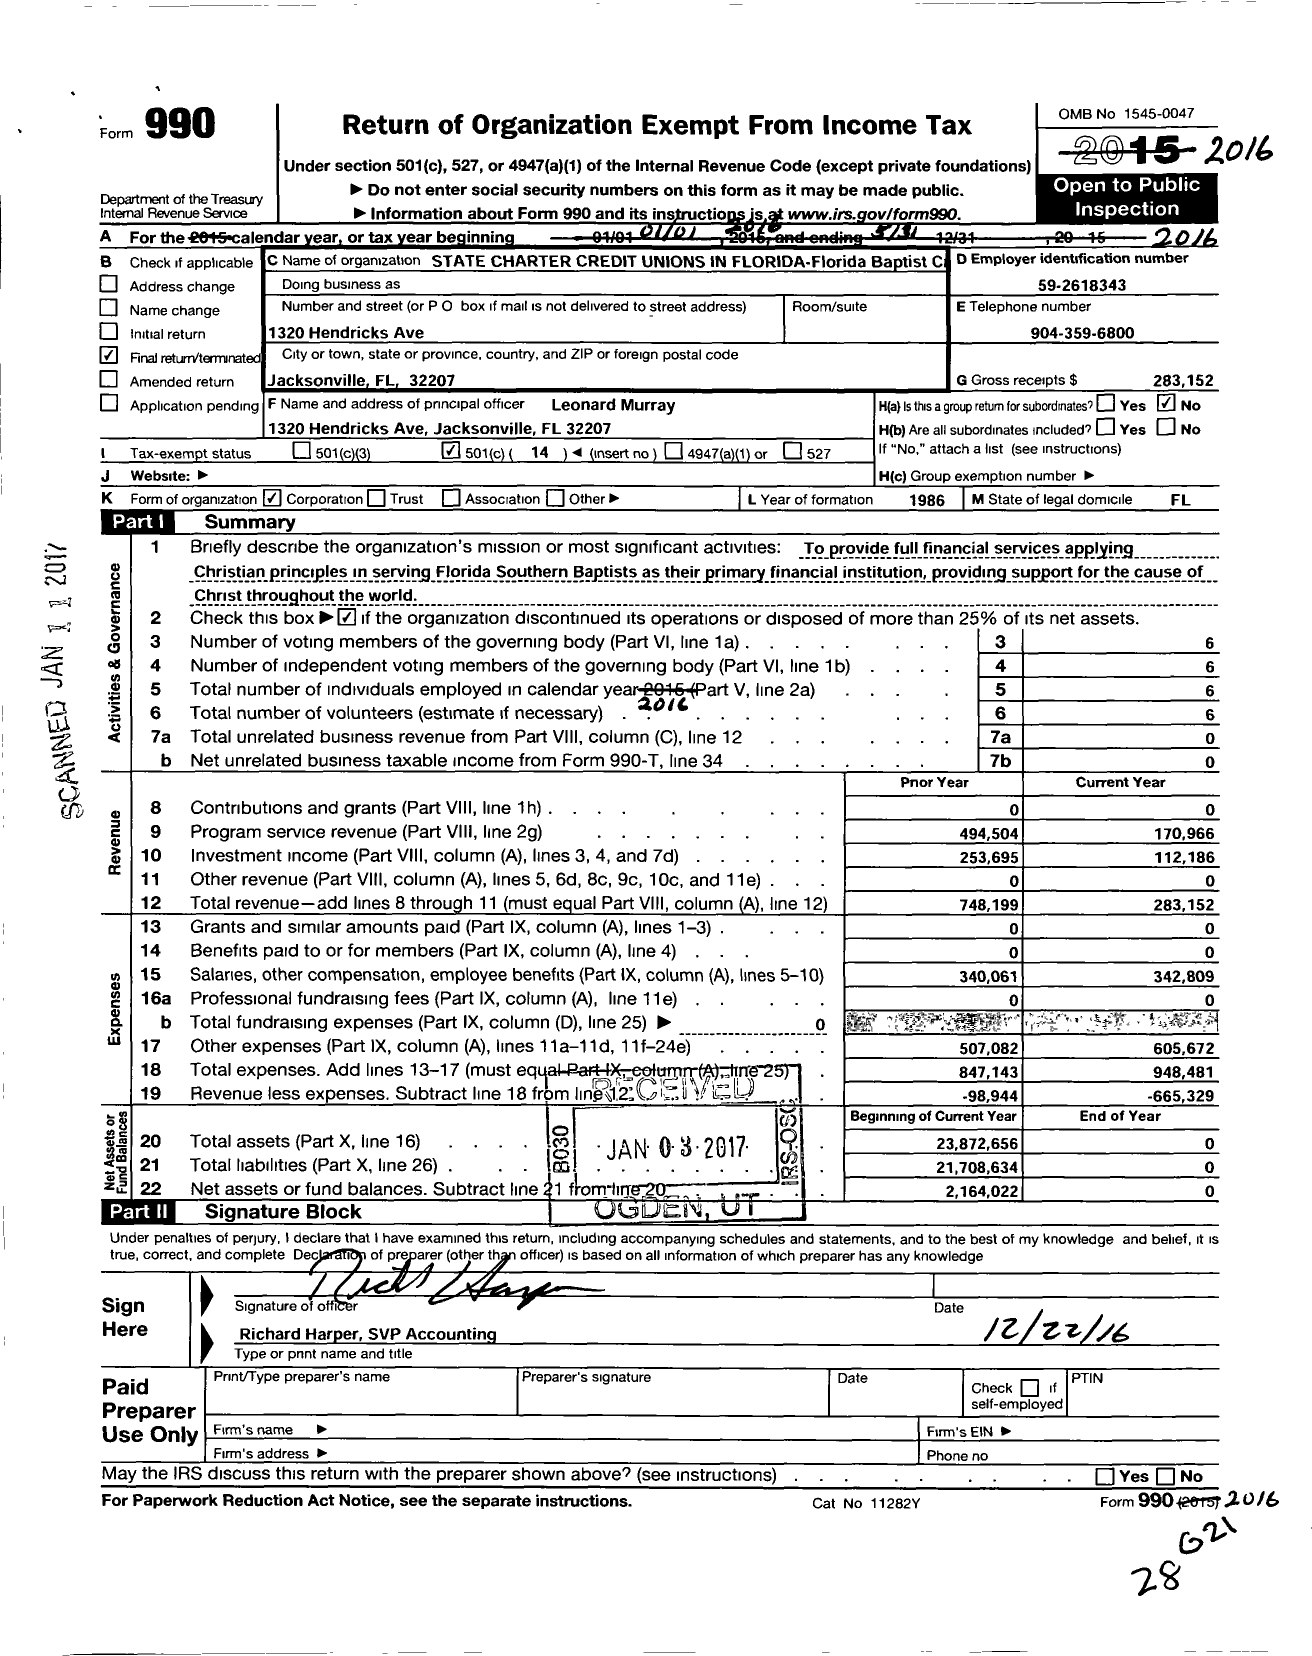 Image of first page of 2015 Form 990O for STATE CHARTER Credit UNIONS IN Florida - 653 Florida Baptist Credit Union